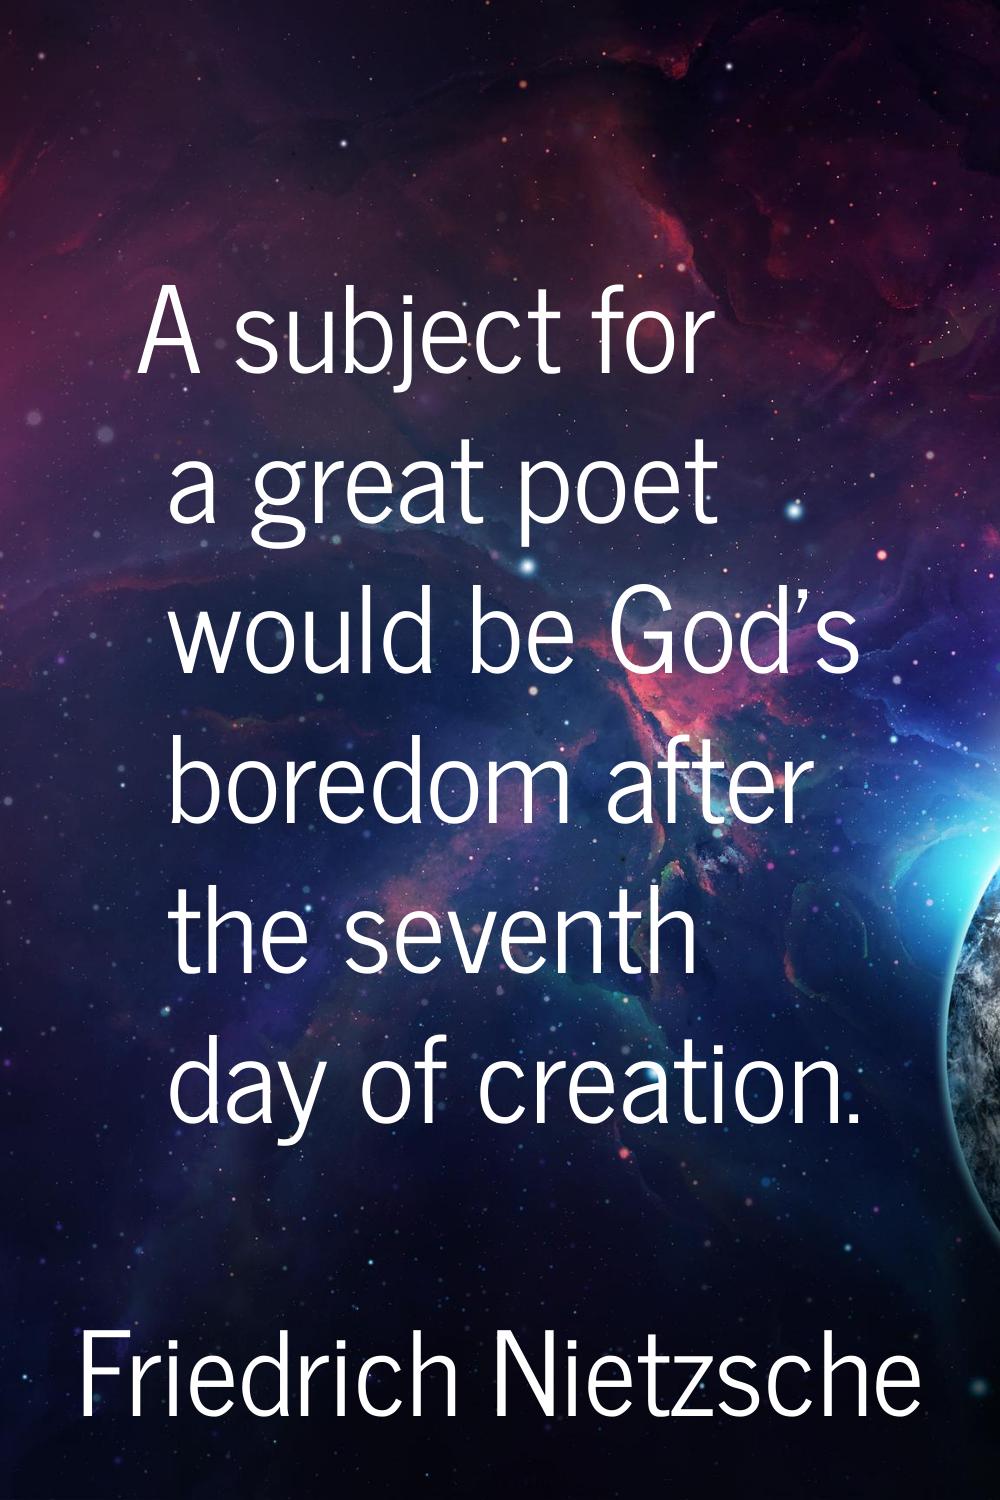 A subject for a great poet would be God's boredom after the seventh day of creation.